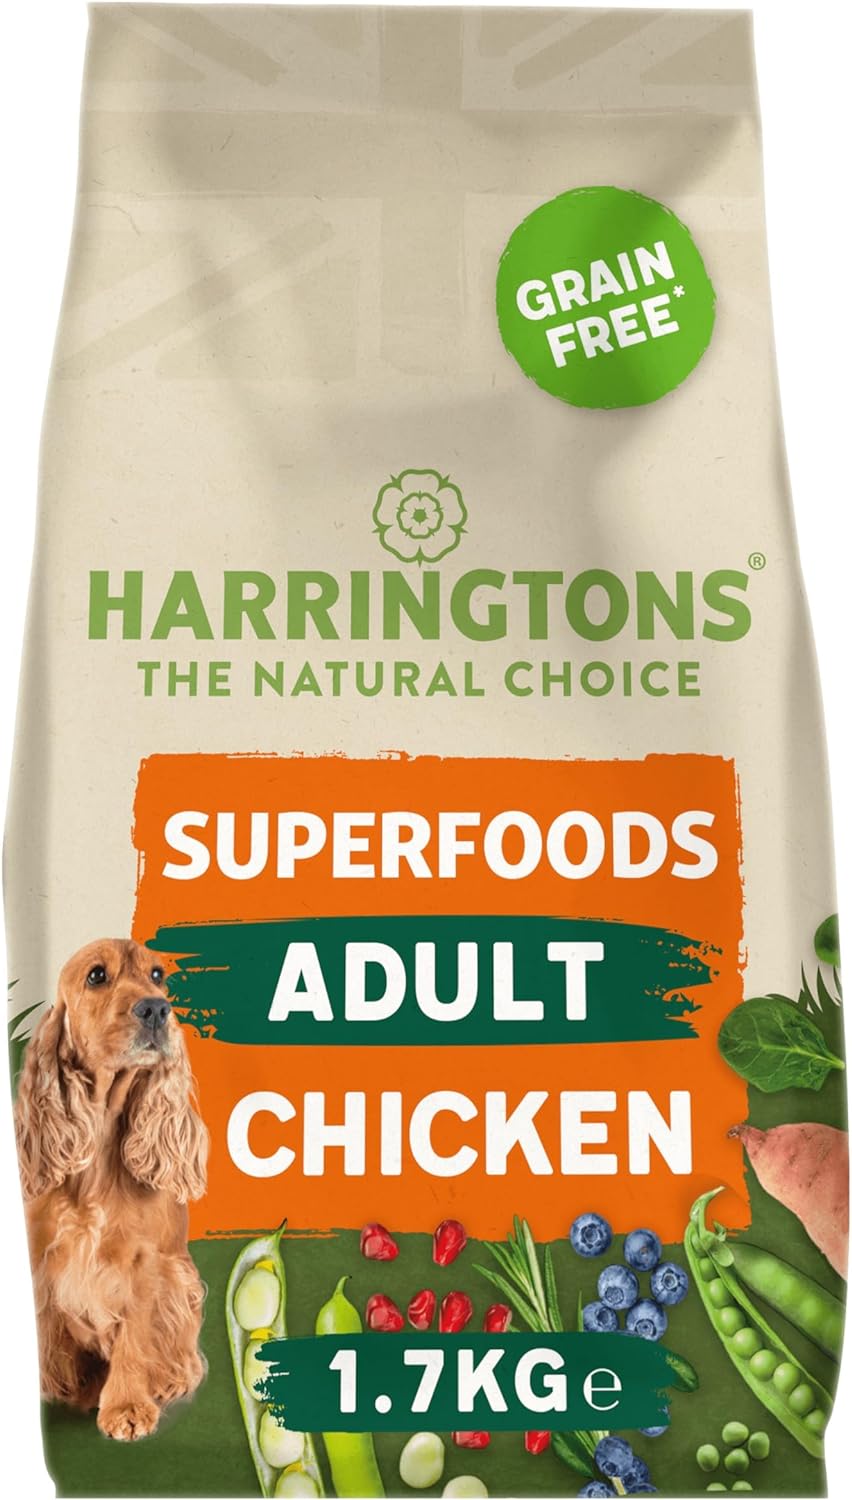 Harringtons Superfoods Complete Grain Free Hypoallergenic Chicken with Veg Dry Adult Dog Food 1.7kg (Pack of 4) - Made with All Natural Ingredients?HARRGFSC-C1.7